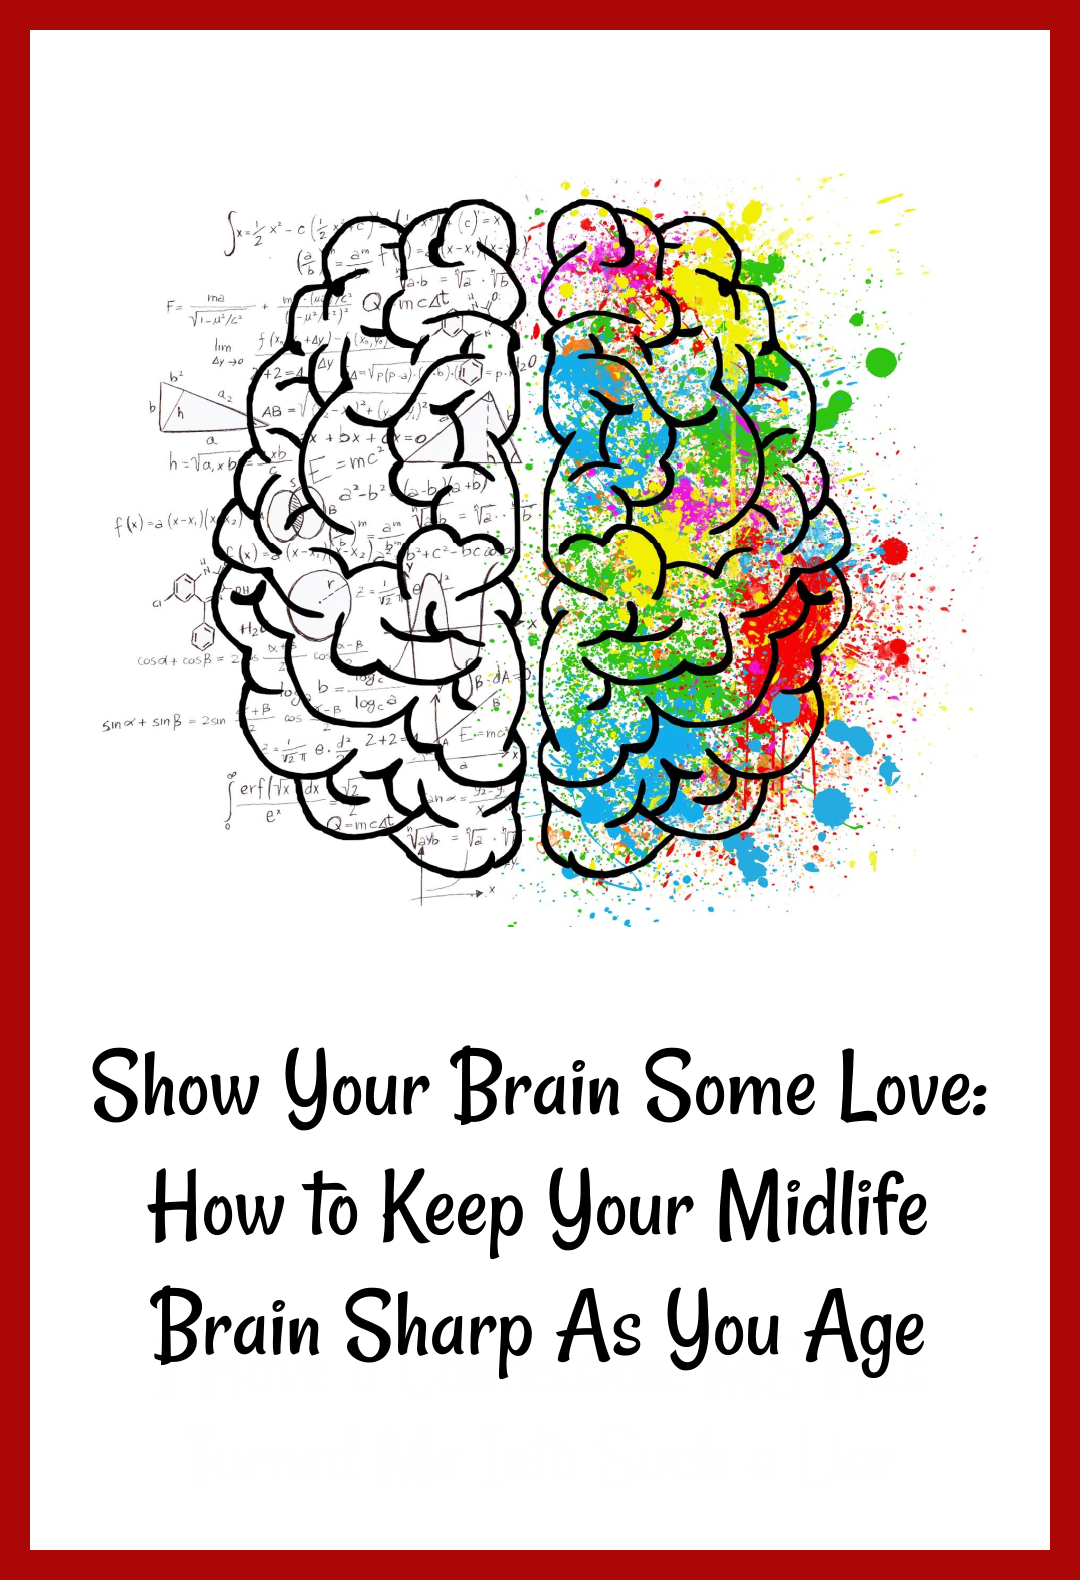 Show Your Brain Some Love: How to Keep Your Midlife Brain Sharp As You Age